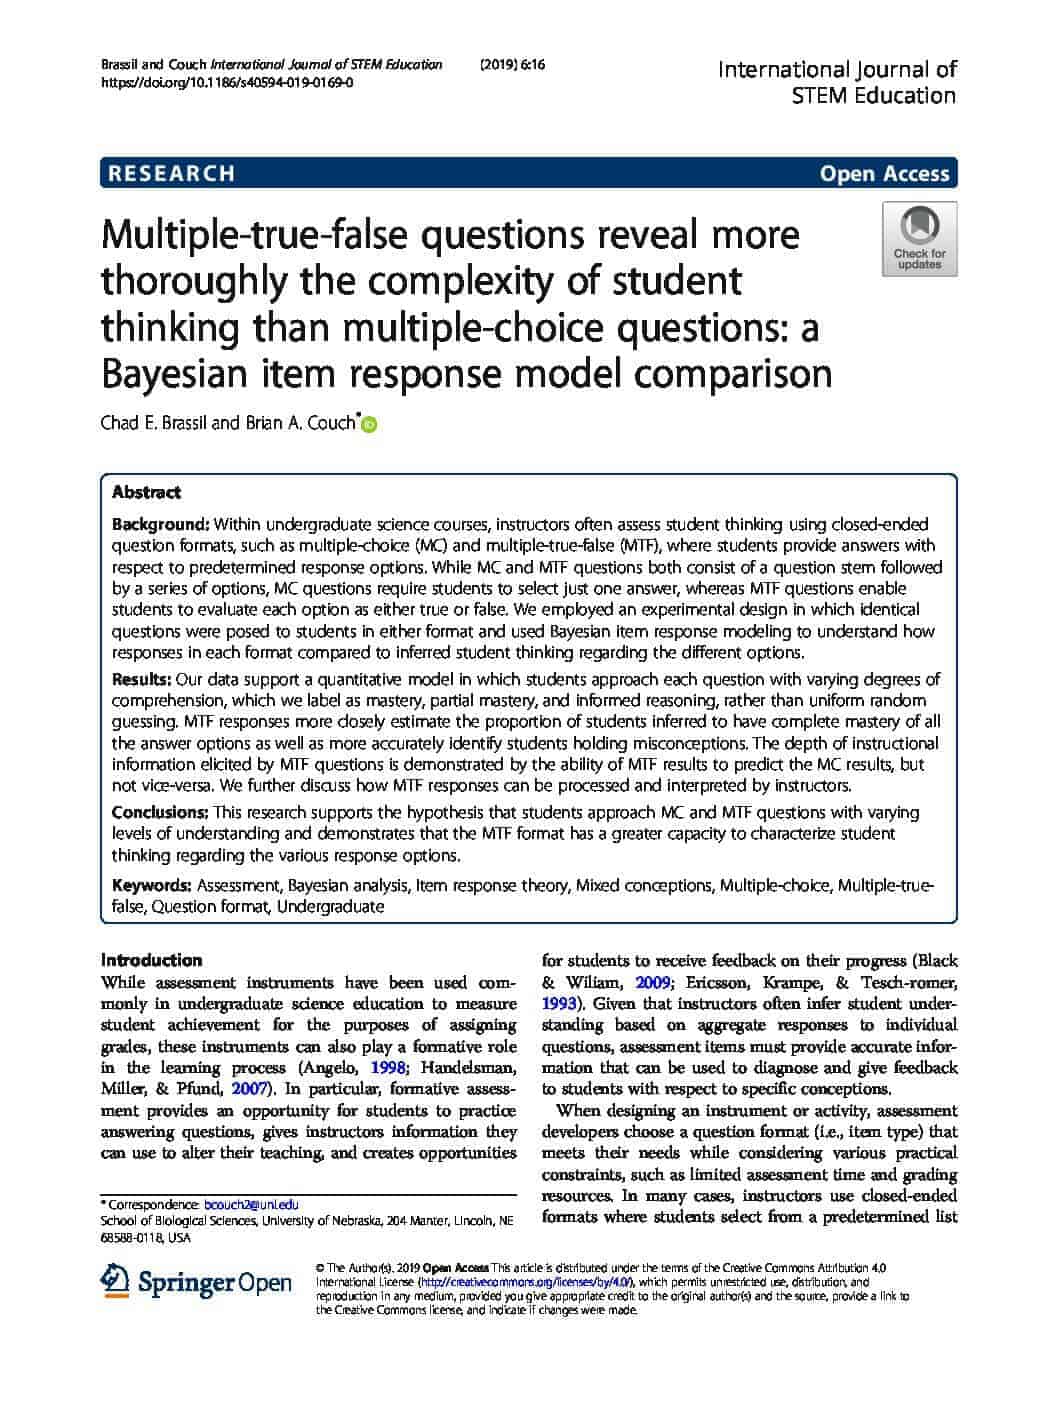 Multiple-true-false questions reveal more thoroughly the complexity of student thinking than multiple-choice questions: a Bayesian item response model comparison